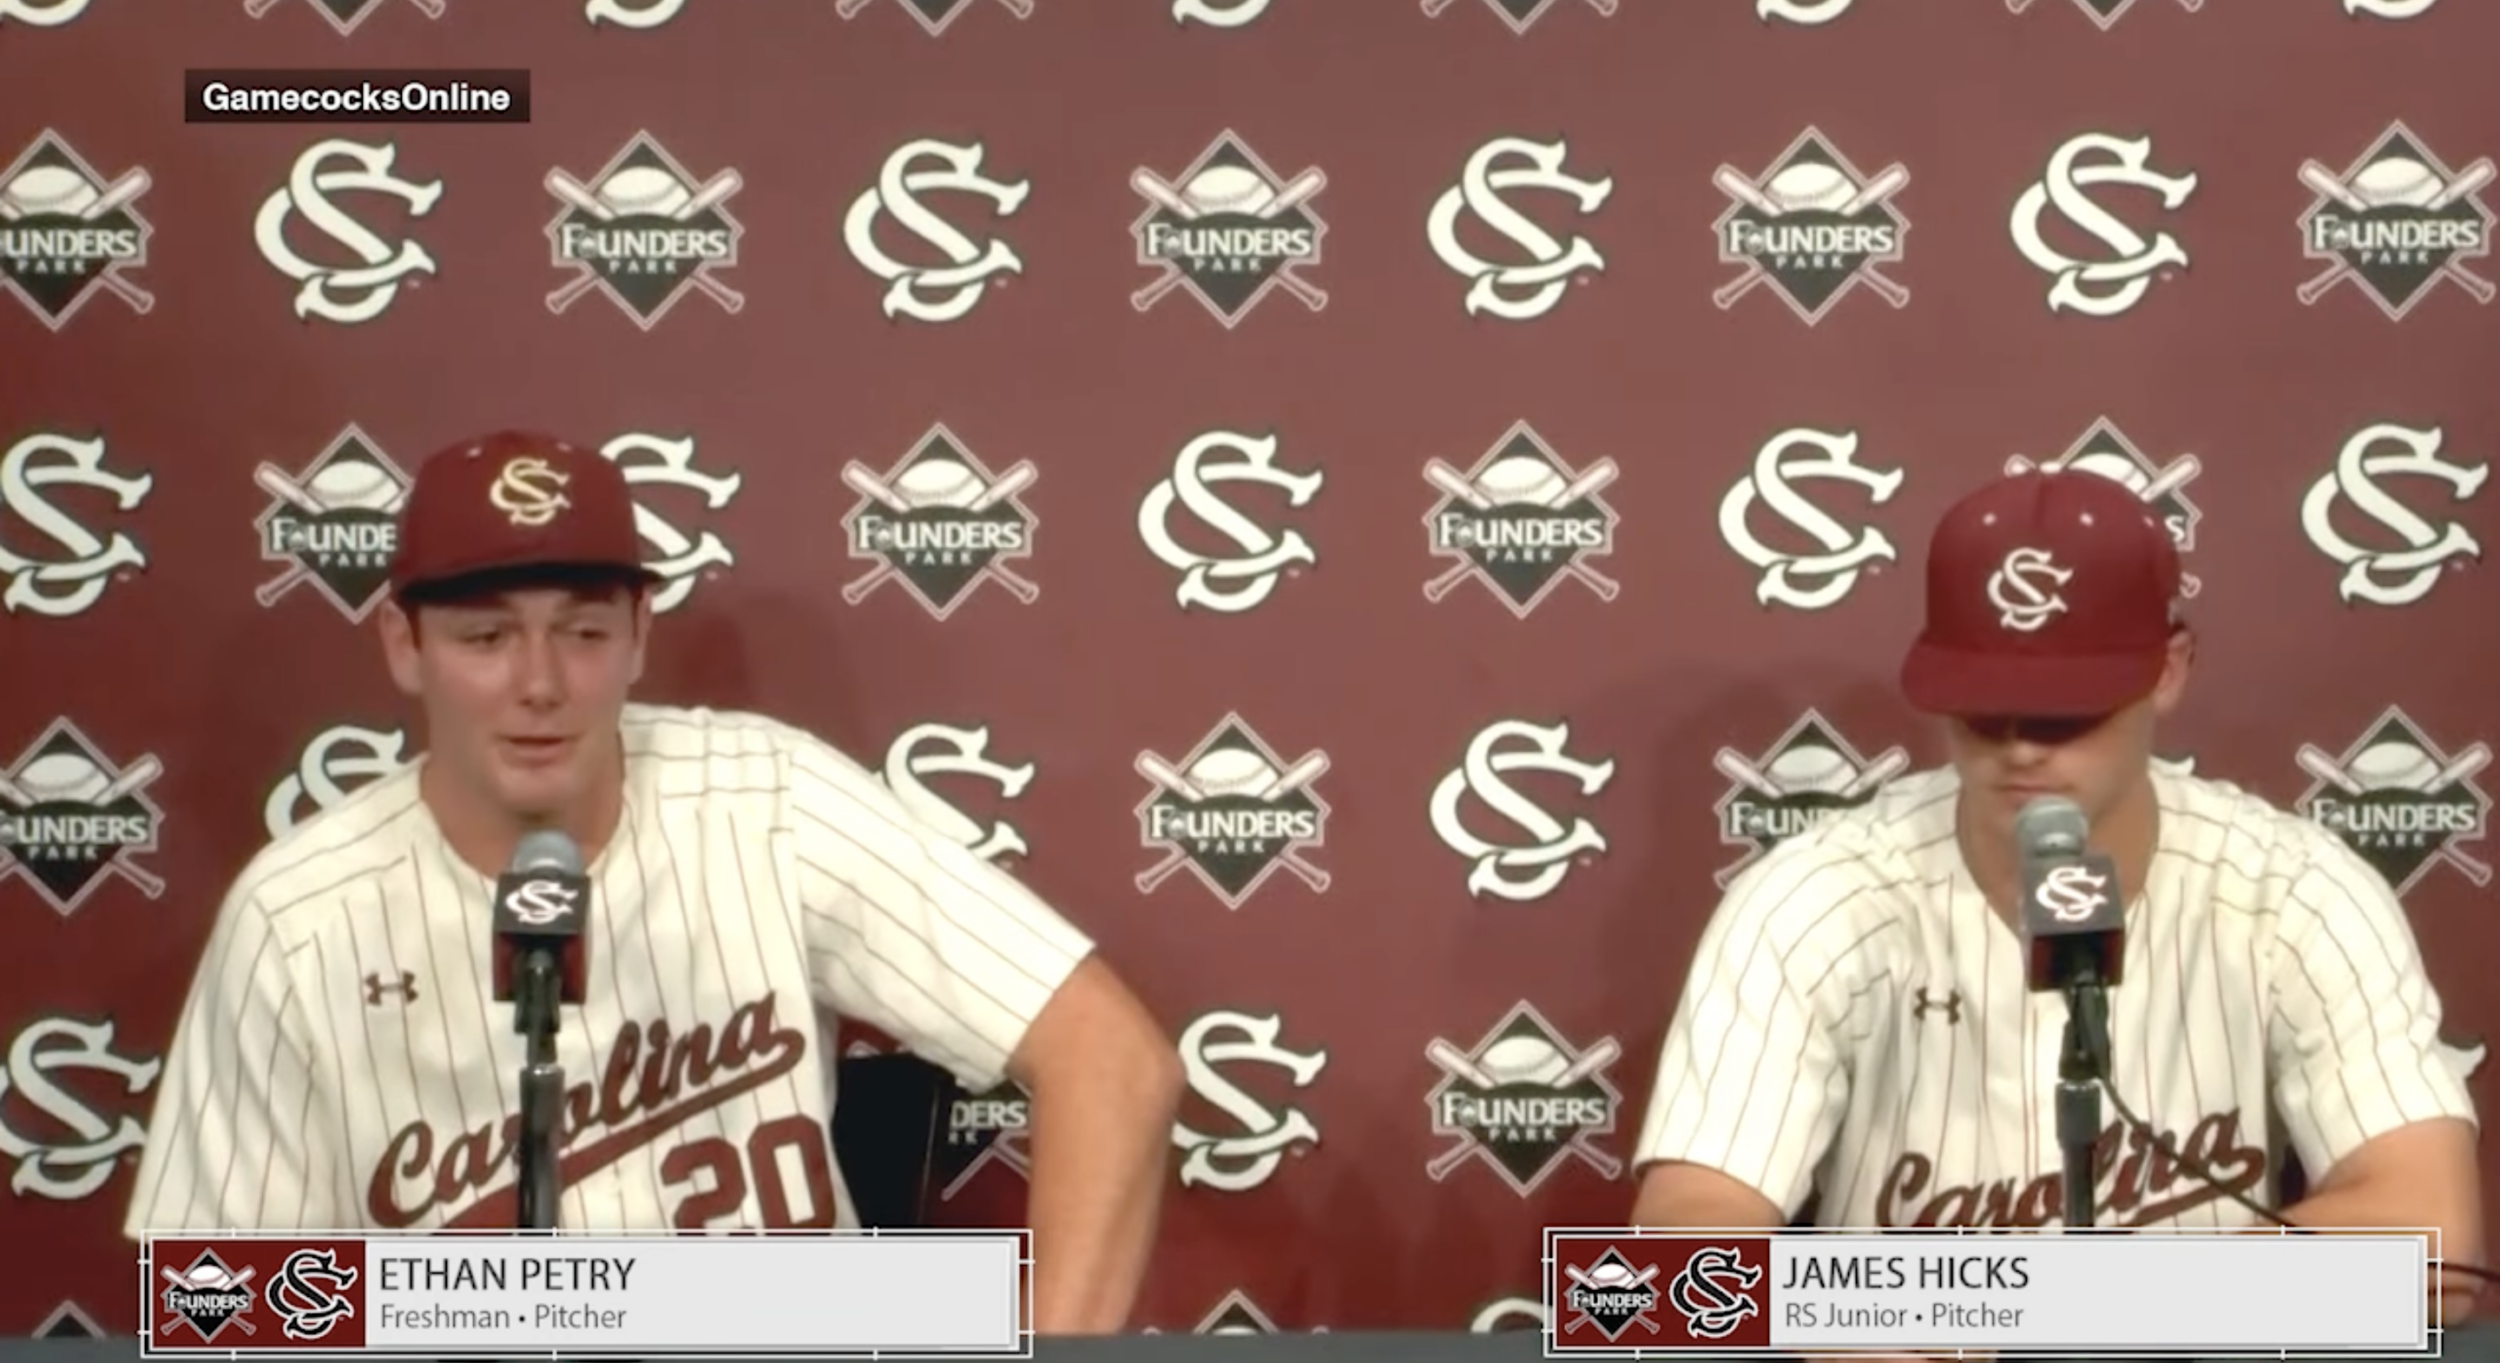 PostGame News Conference: (LSU) - Ethan Petry and James Hicks